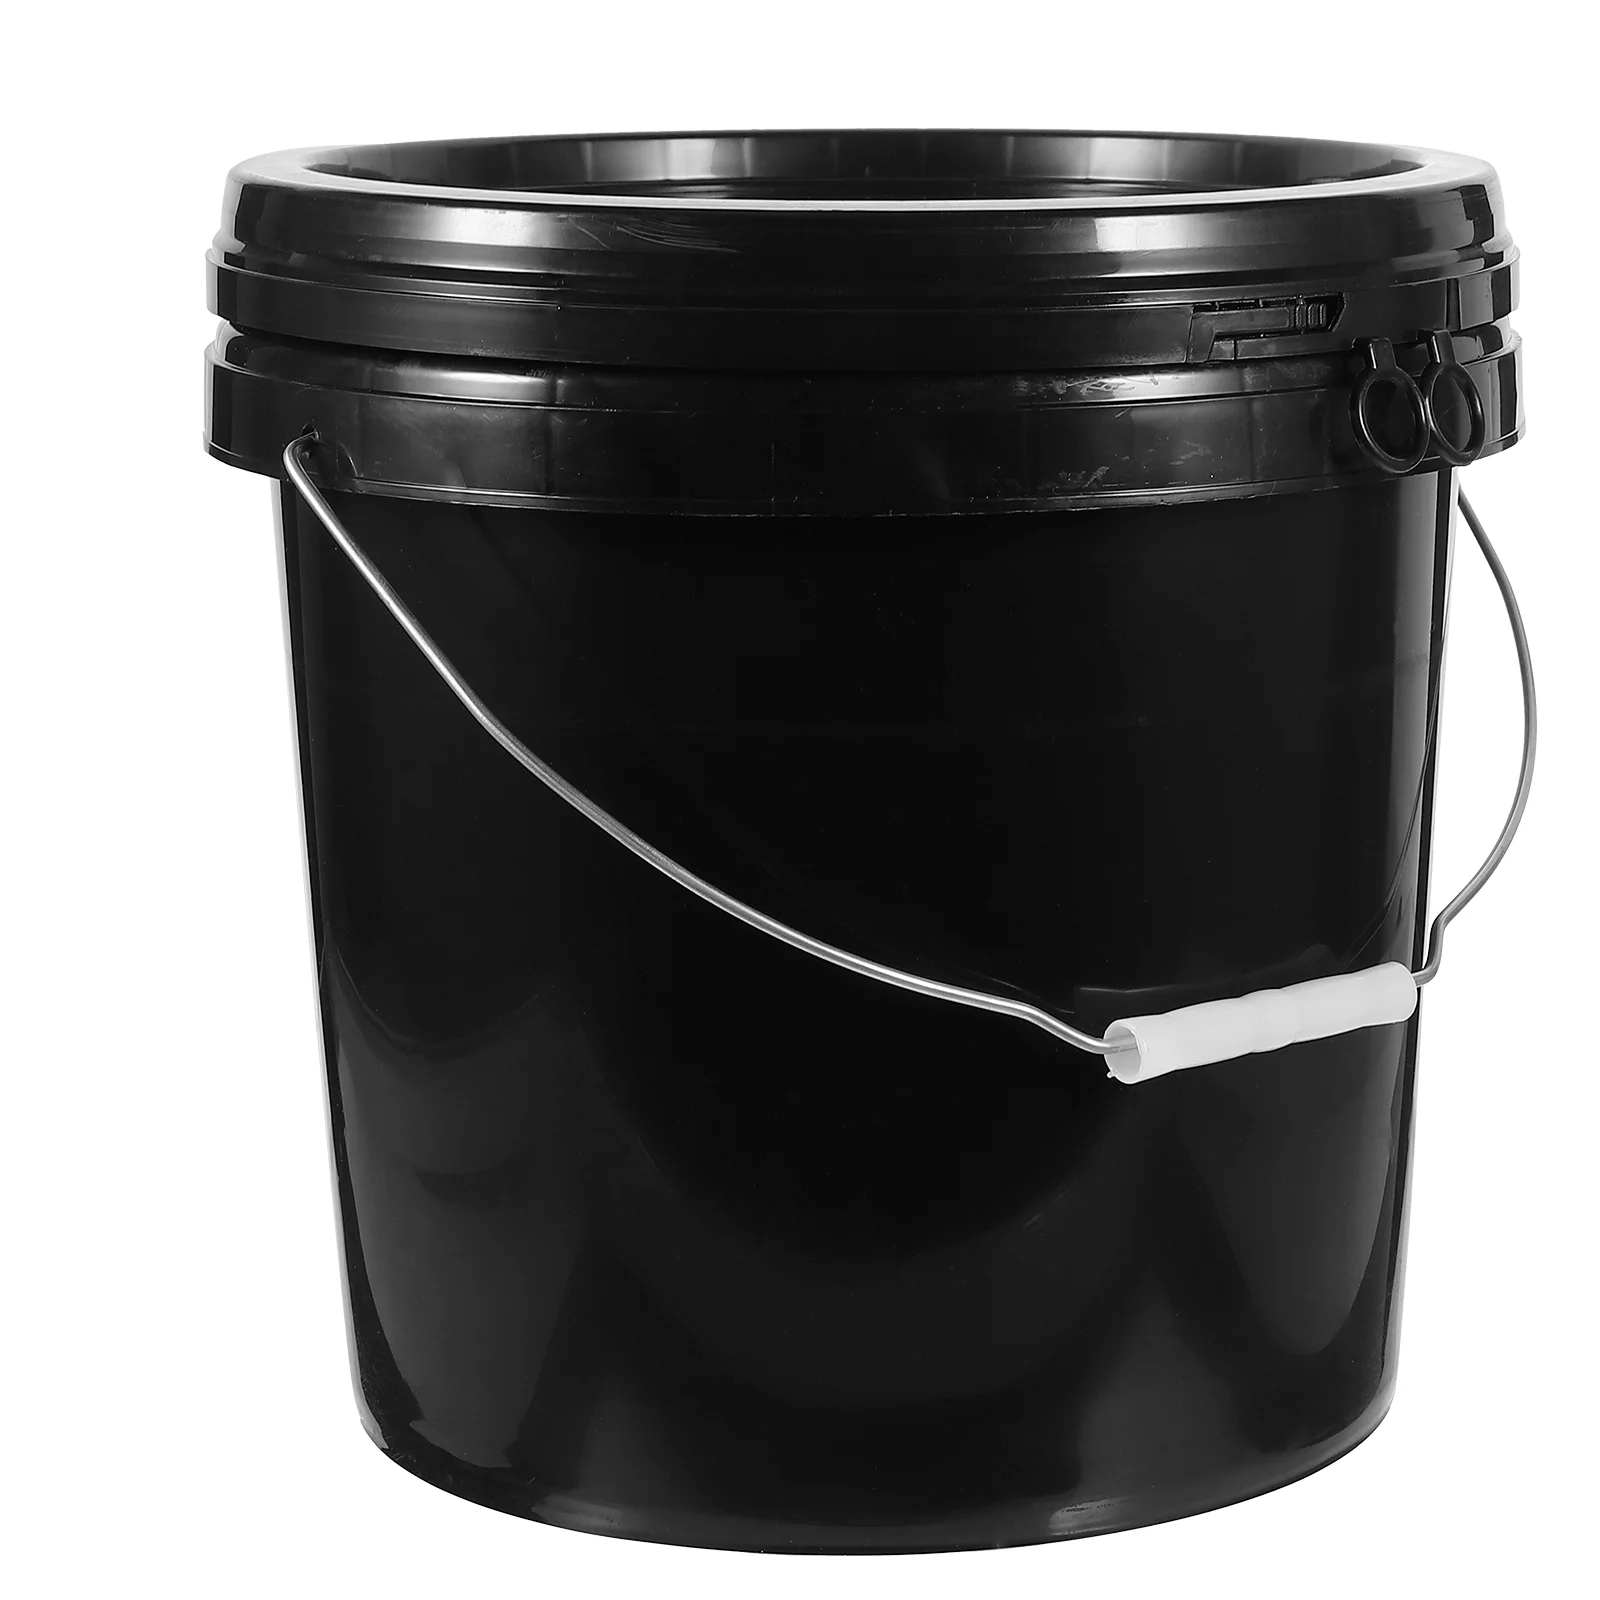 

10 Liter White Abs Bucket Paint Buckets for Painting 10L Storage Container Hdpe Empty Gallon with Lid Outdoor